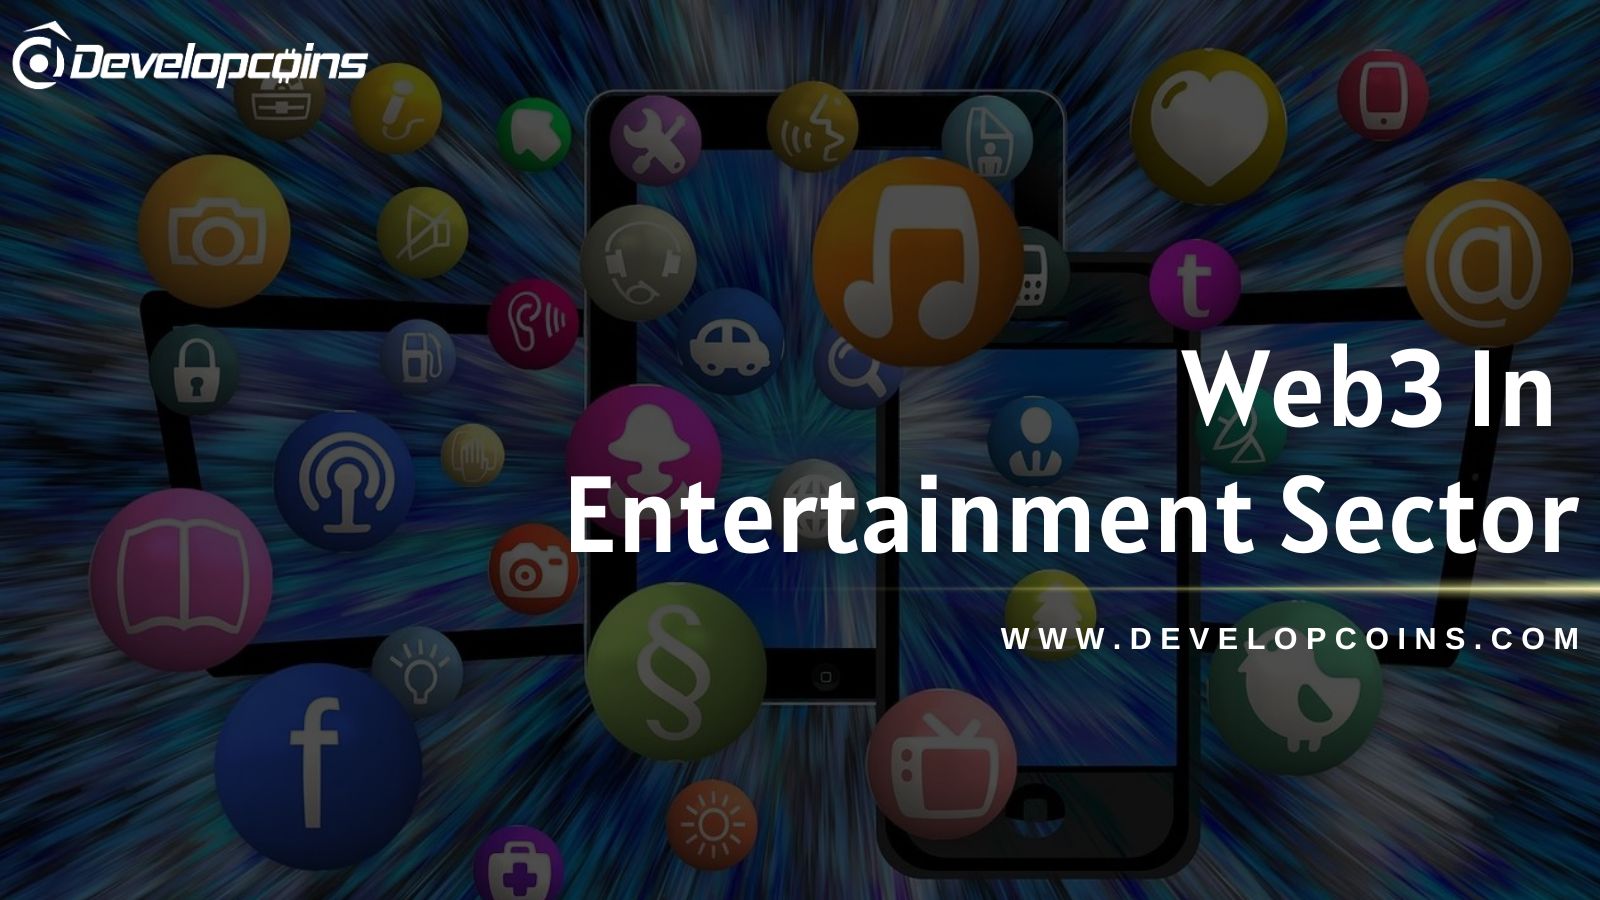 Web3 In Entertainment - An Advancement In Social Media, Music, Games, Films